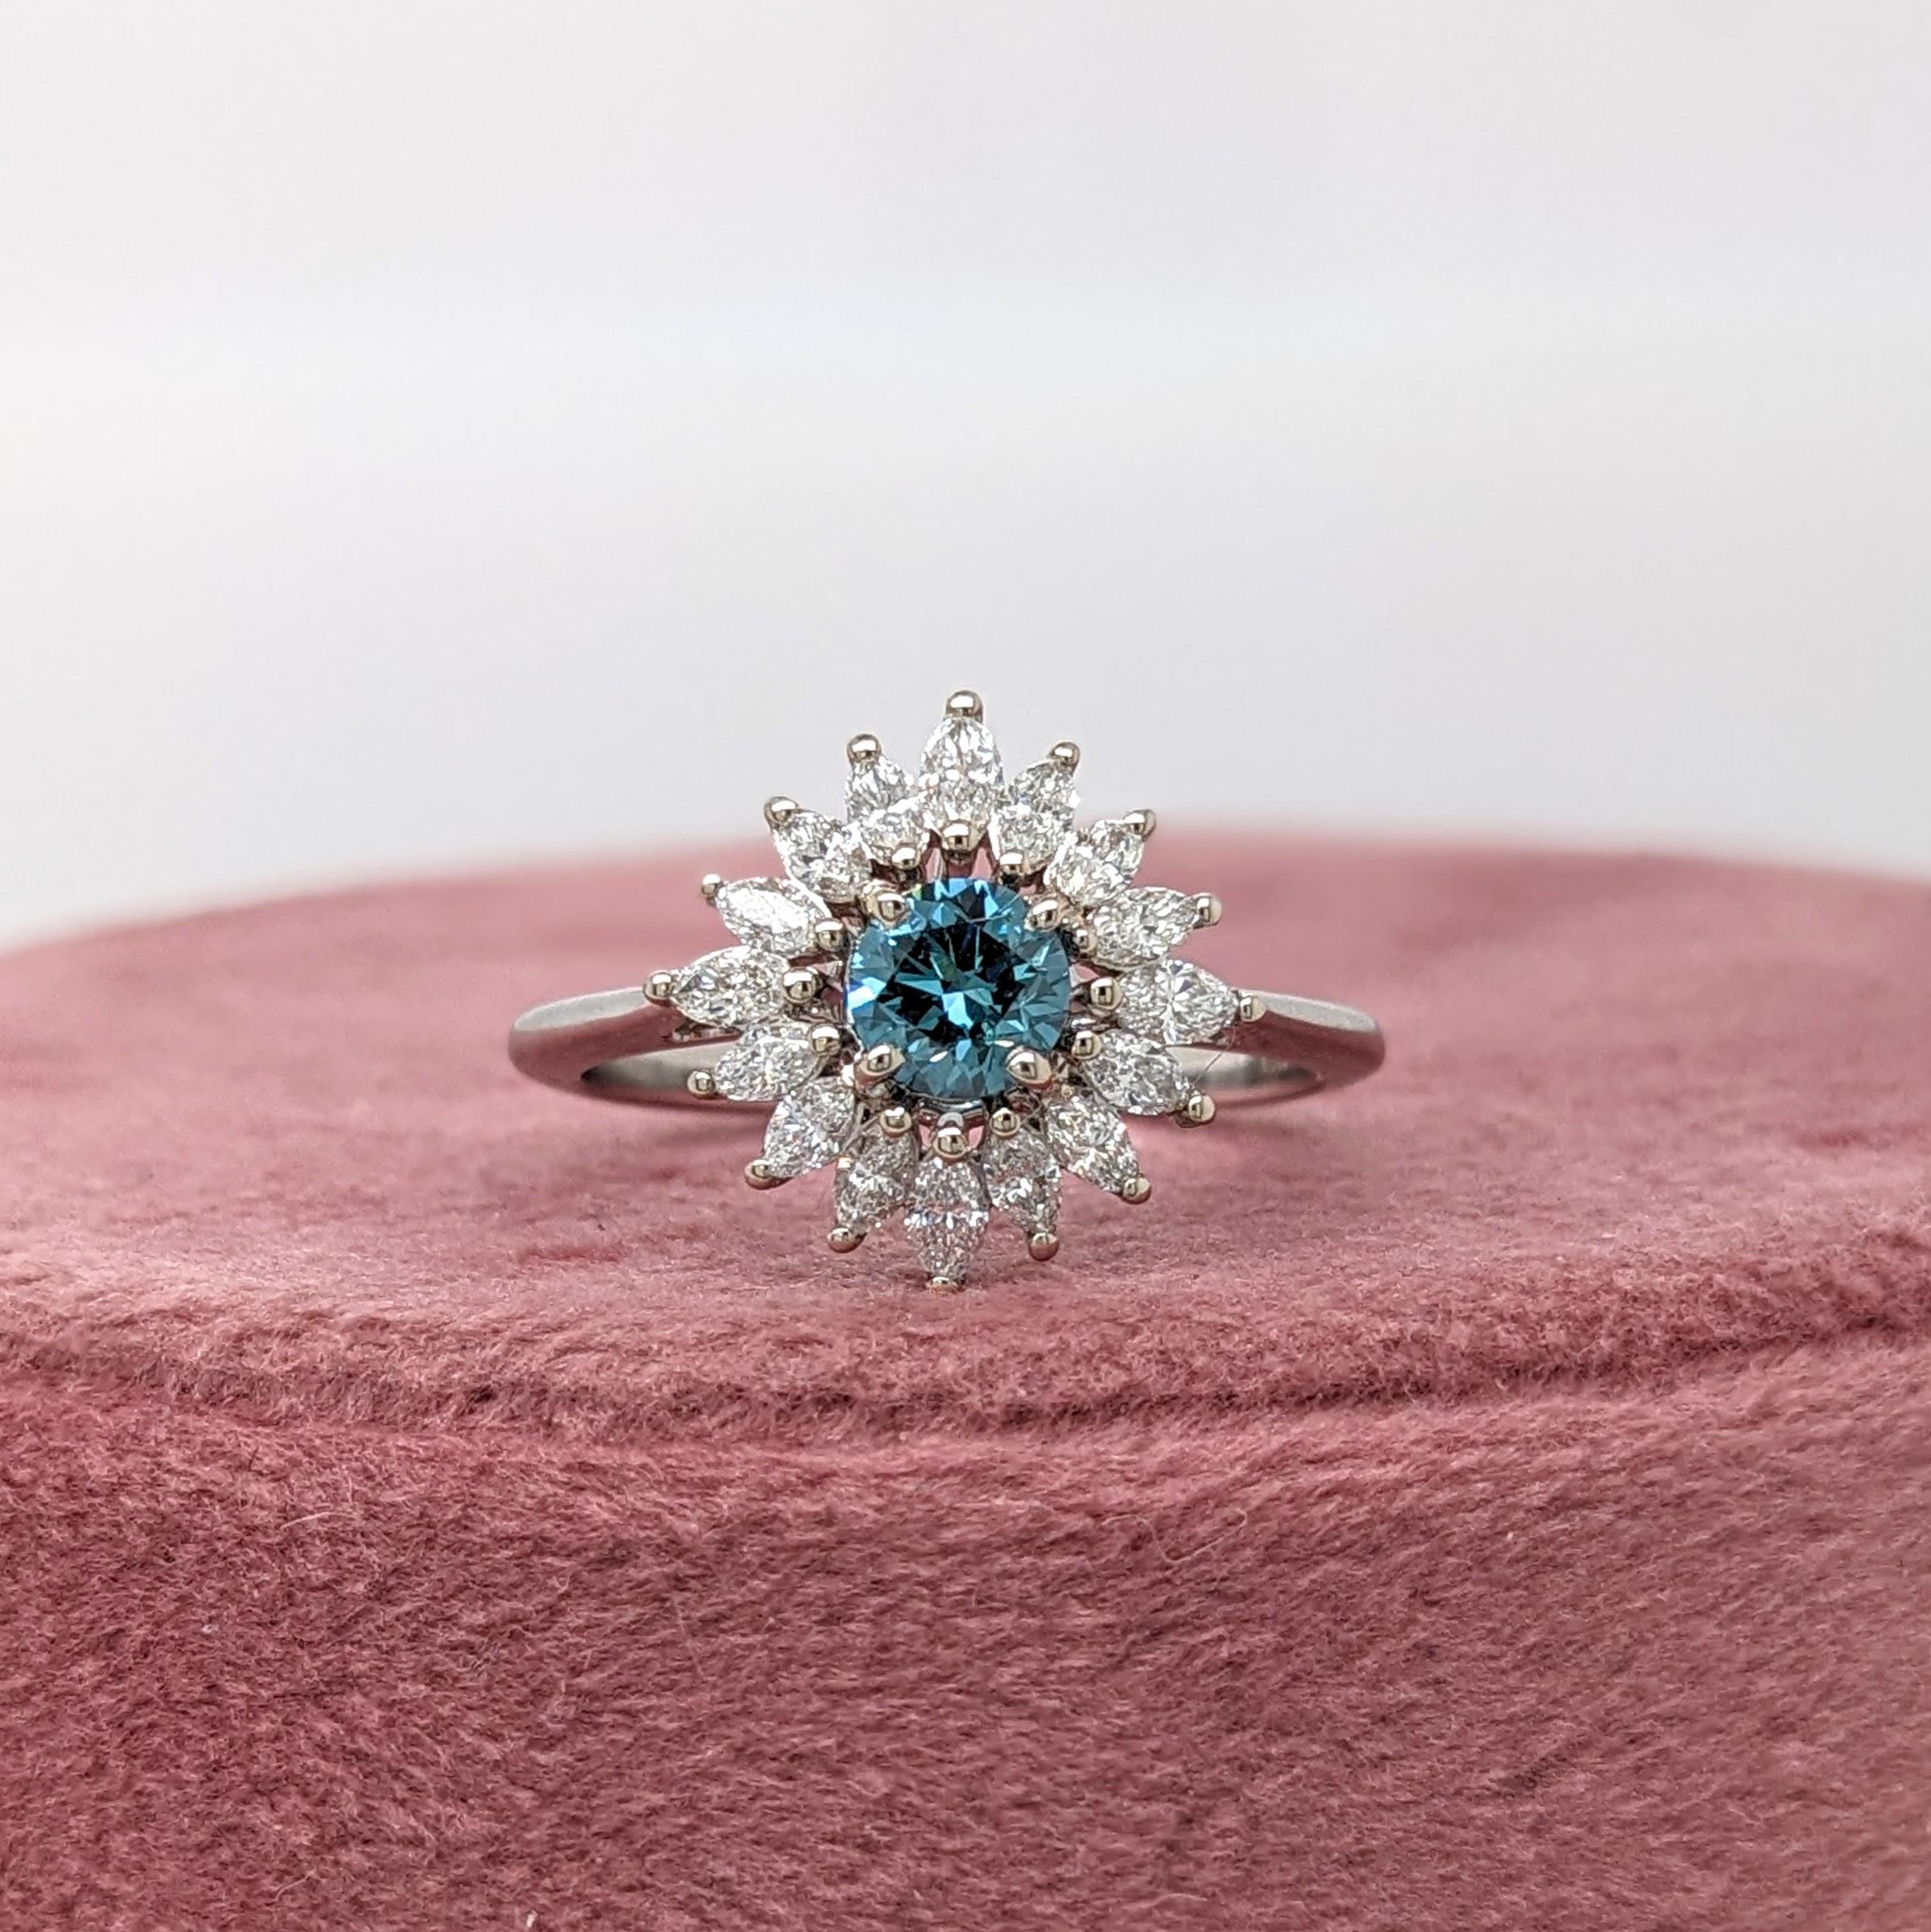 This sparkling white and blue ring is perfect for the modern bride! This beautiful ring features a rare blue round diamond with a snow flake inspired halo of natural earth-mined diamonds. 

Specifications

Item Type: Ring
Centre Stone: Blue Diamond